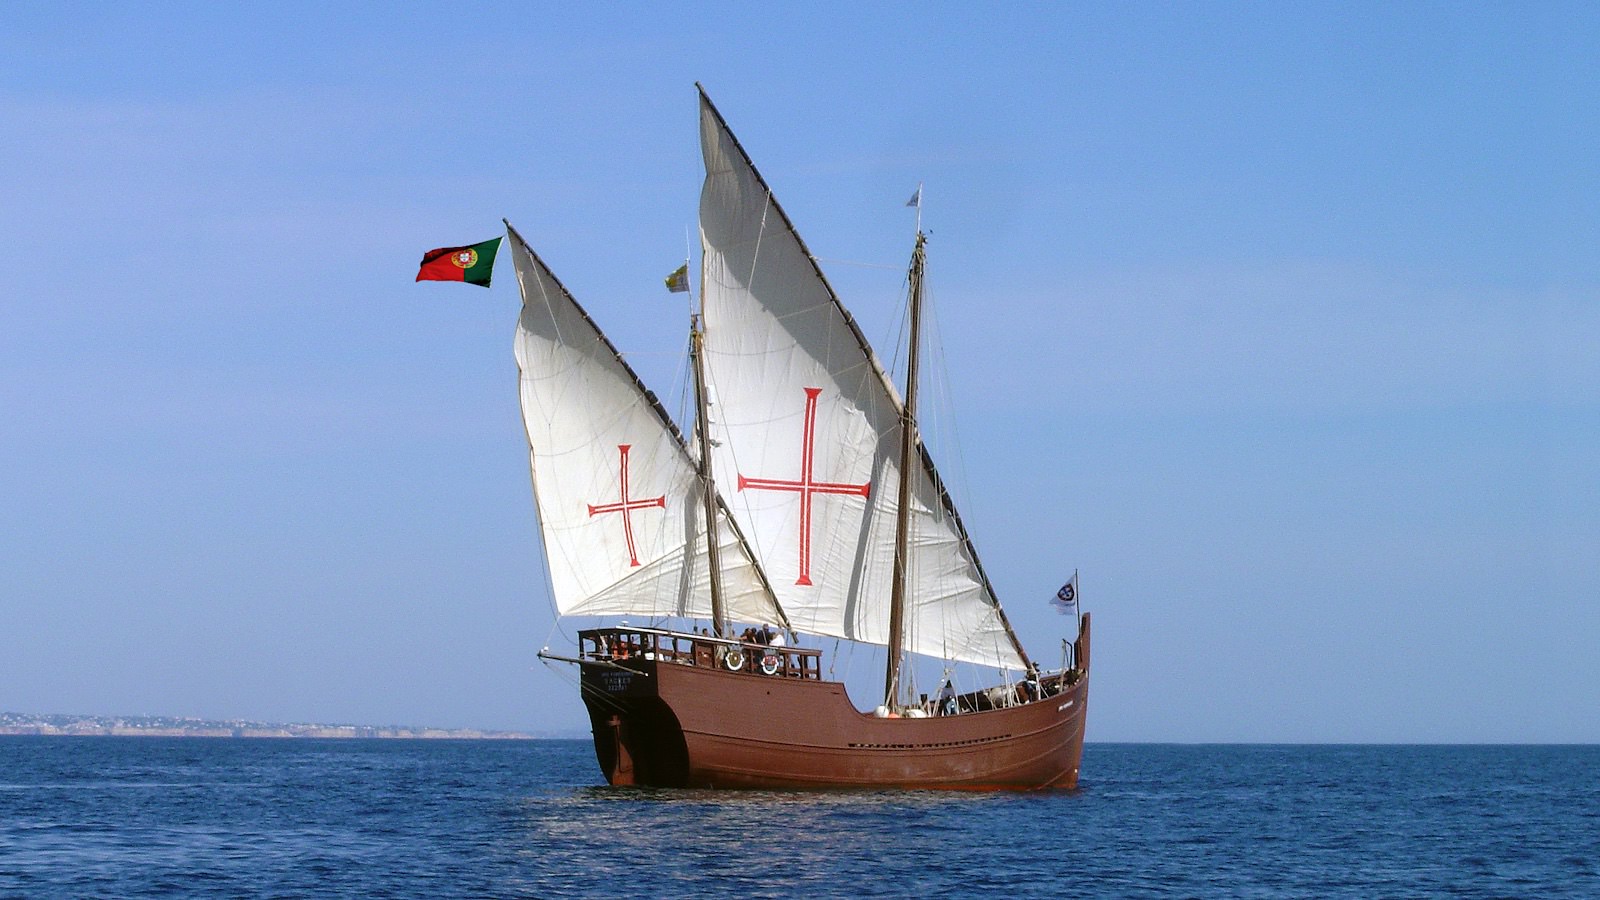 The caravel, used by Portuguese explorers, was a ship with triangular sails that made it possible to sail into the wind.